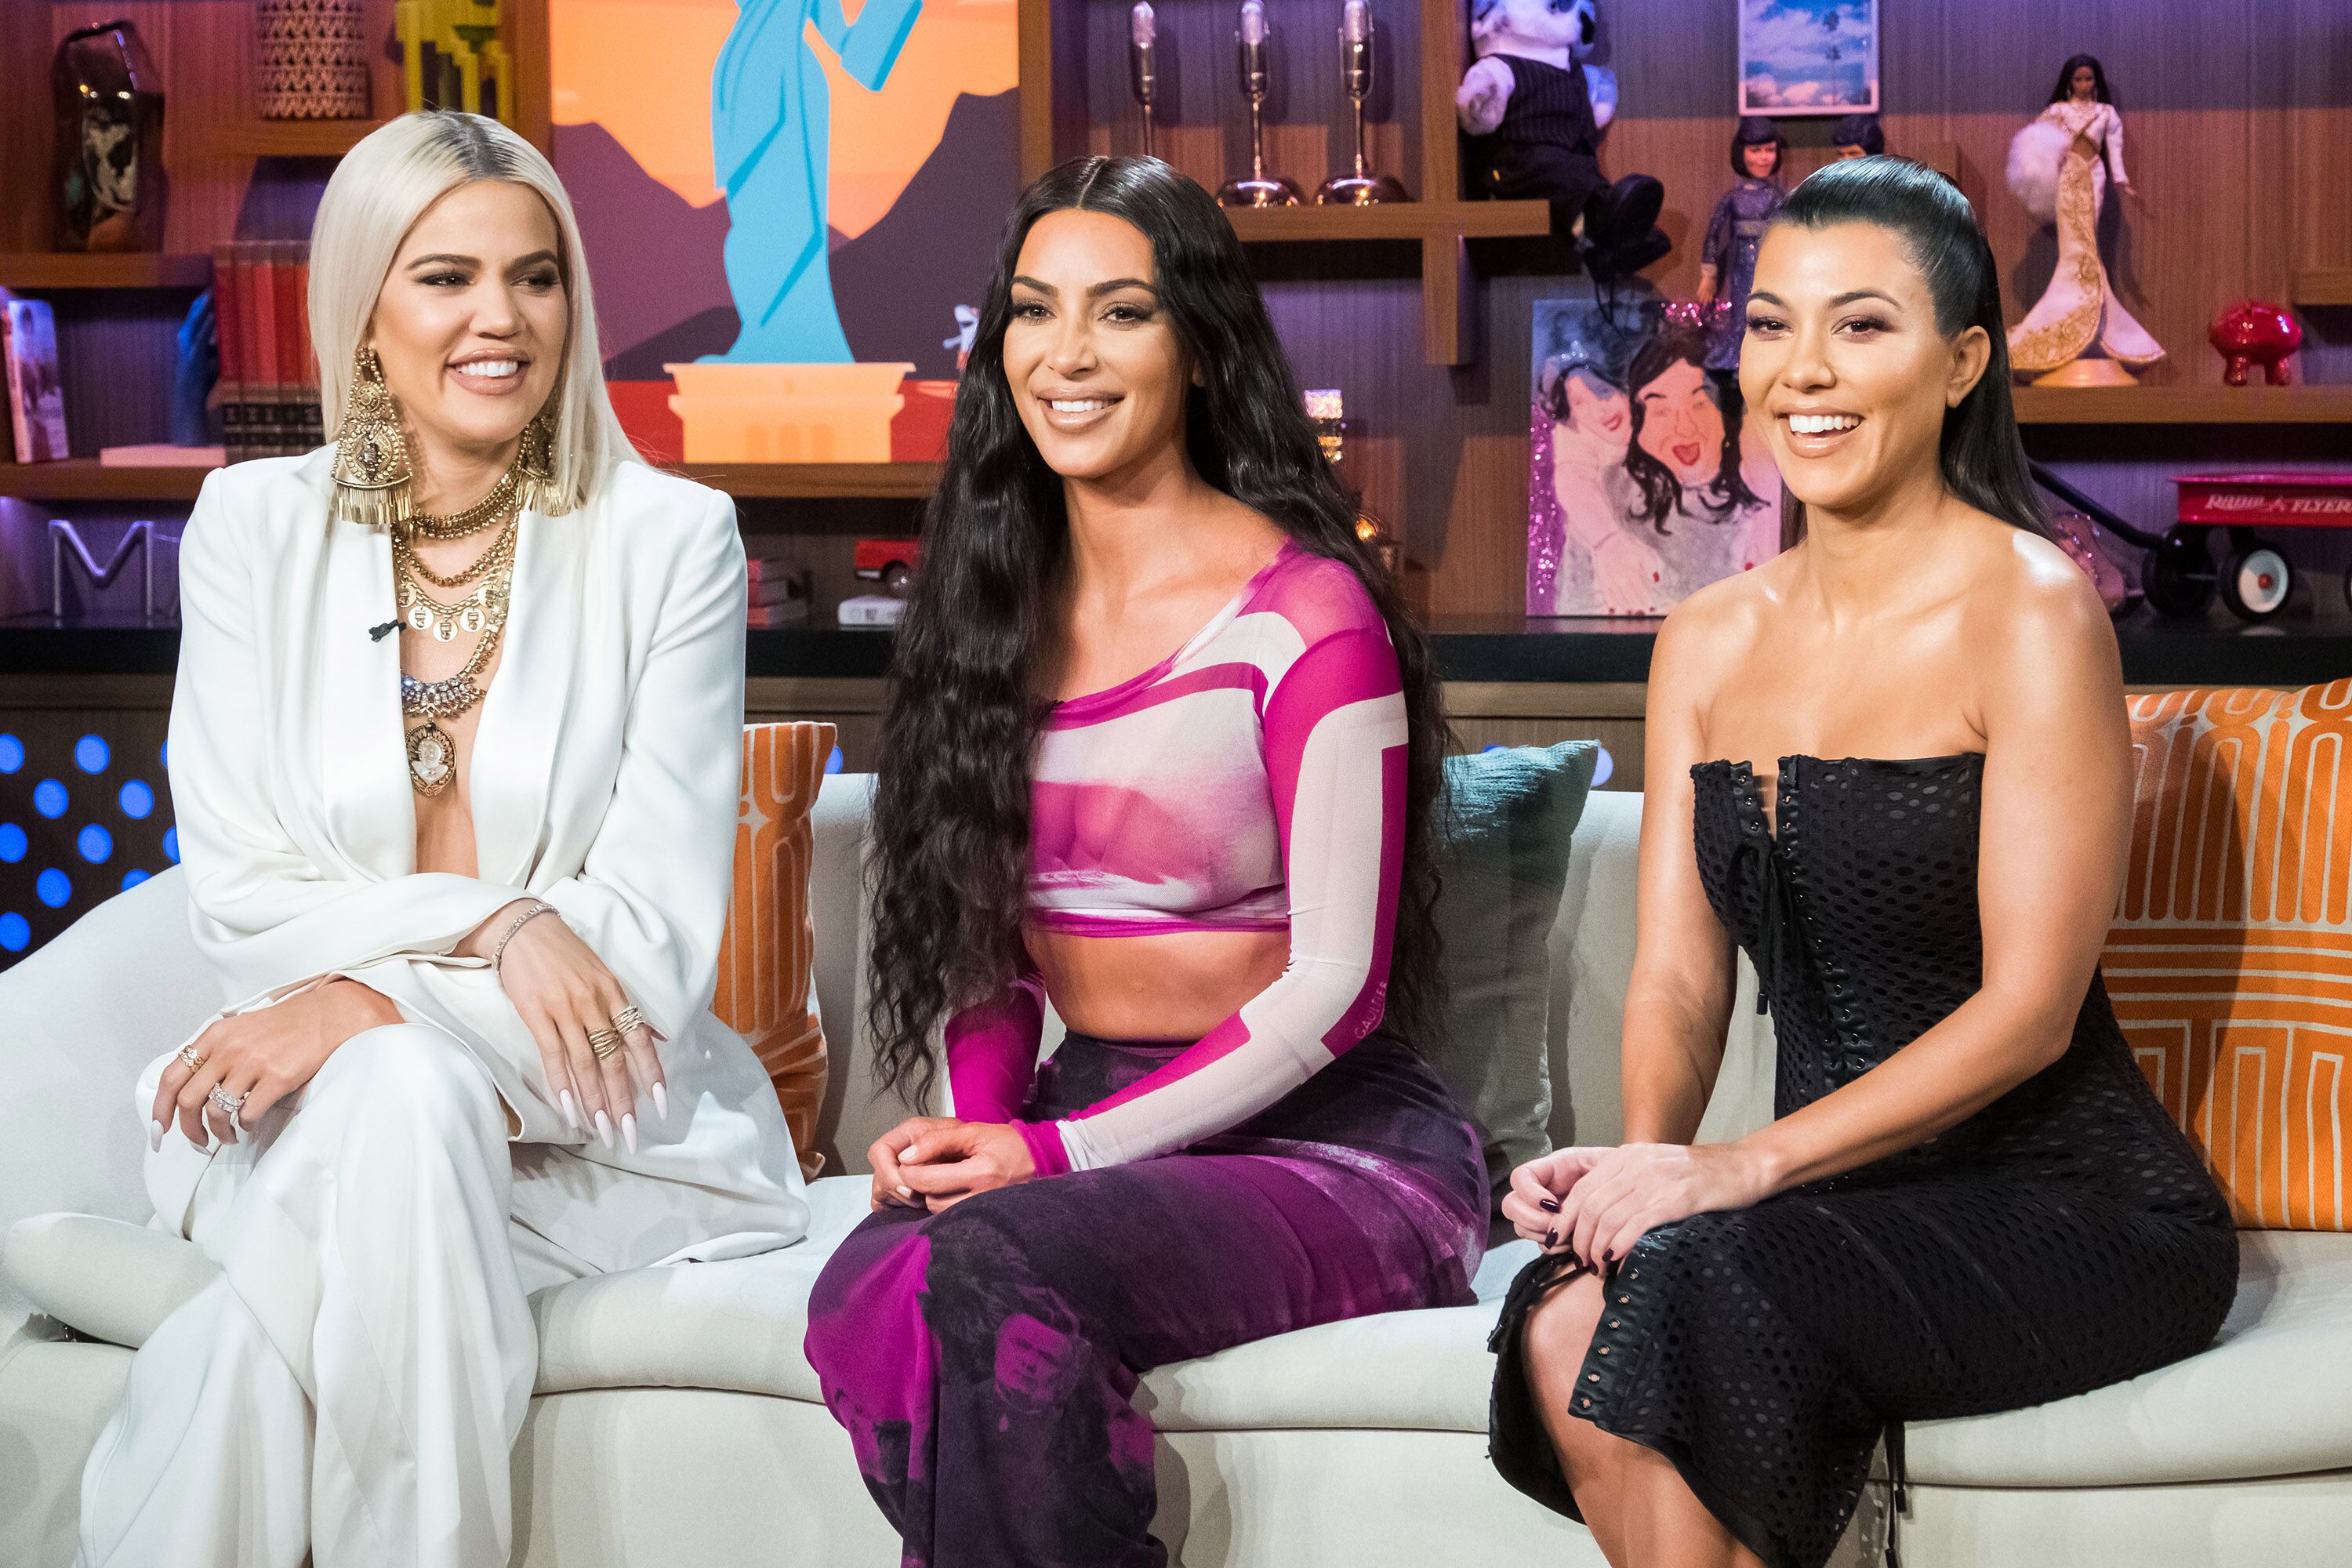 Khloe, Kim, and Kourtney Kardashian on "Watch What Happens Live With Andy Cohen" on January 14, 2019 | Photo: Charles Sykes/Bravo/NBCU Photo Bank/Getty Images)